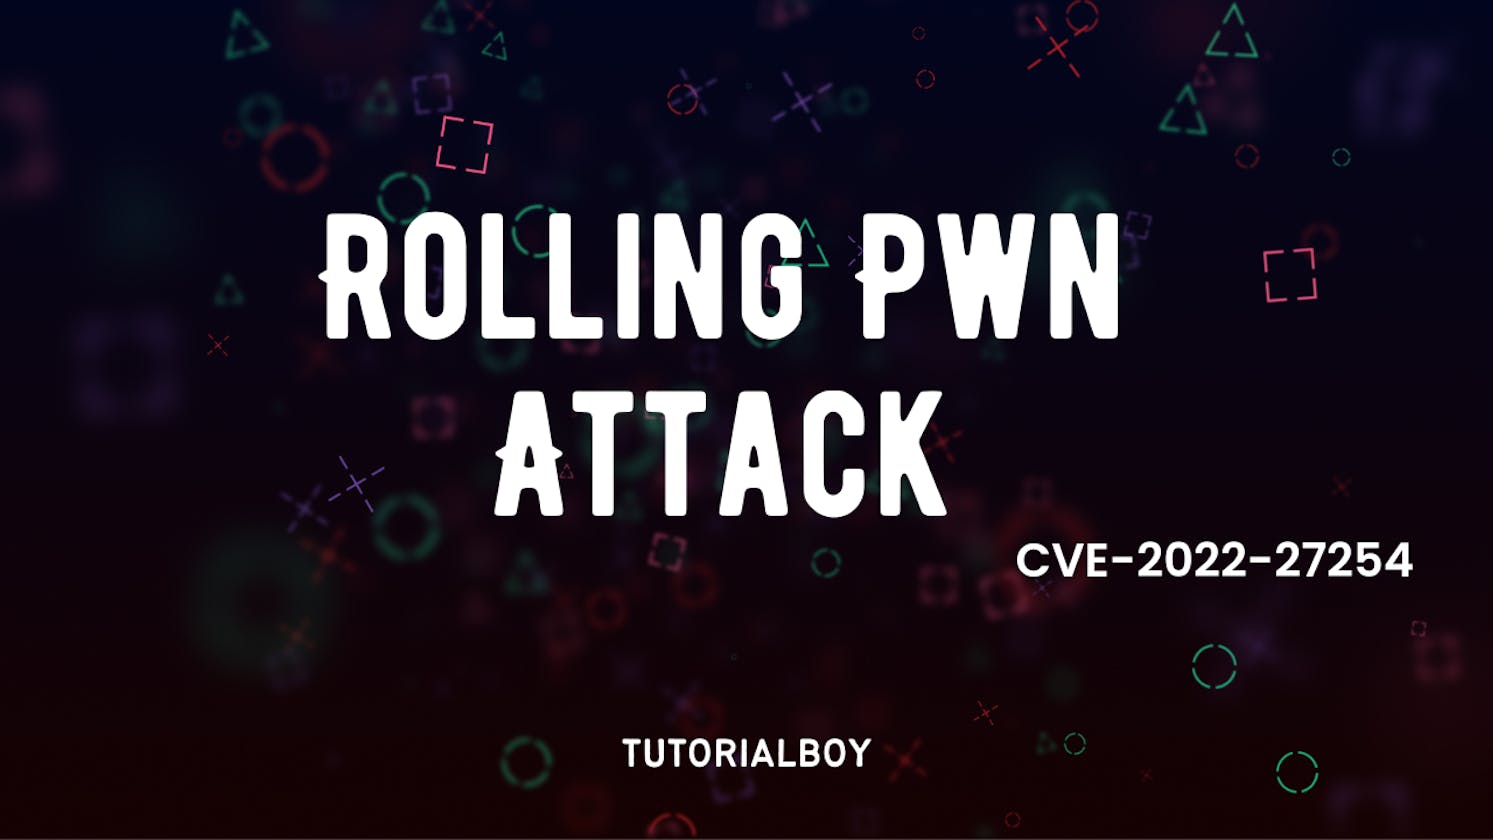 A Rolling-PWN Attack Vulnerability Leads to Unlock or Start Vehicles Remotely - CVE-2022-27254